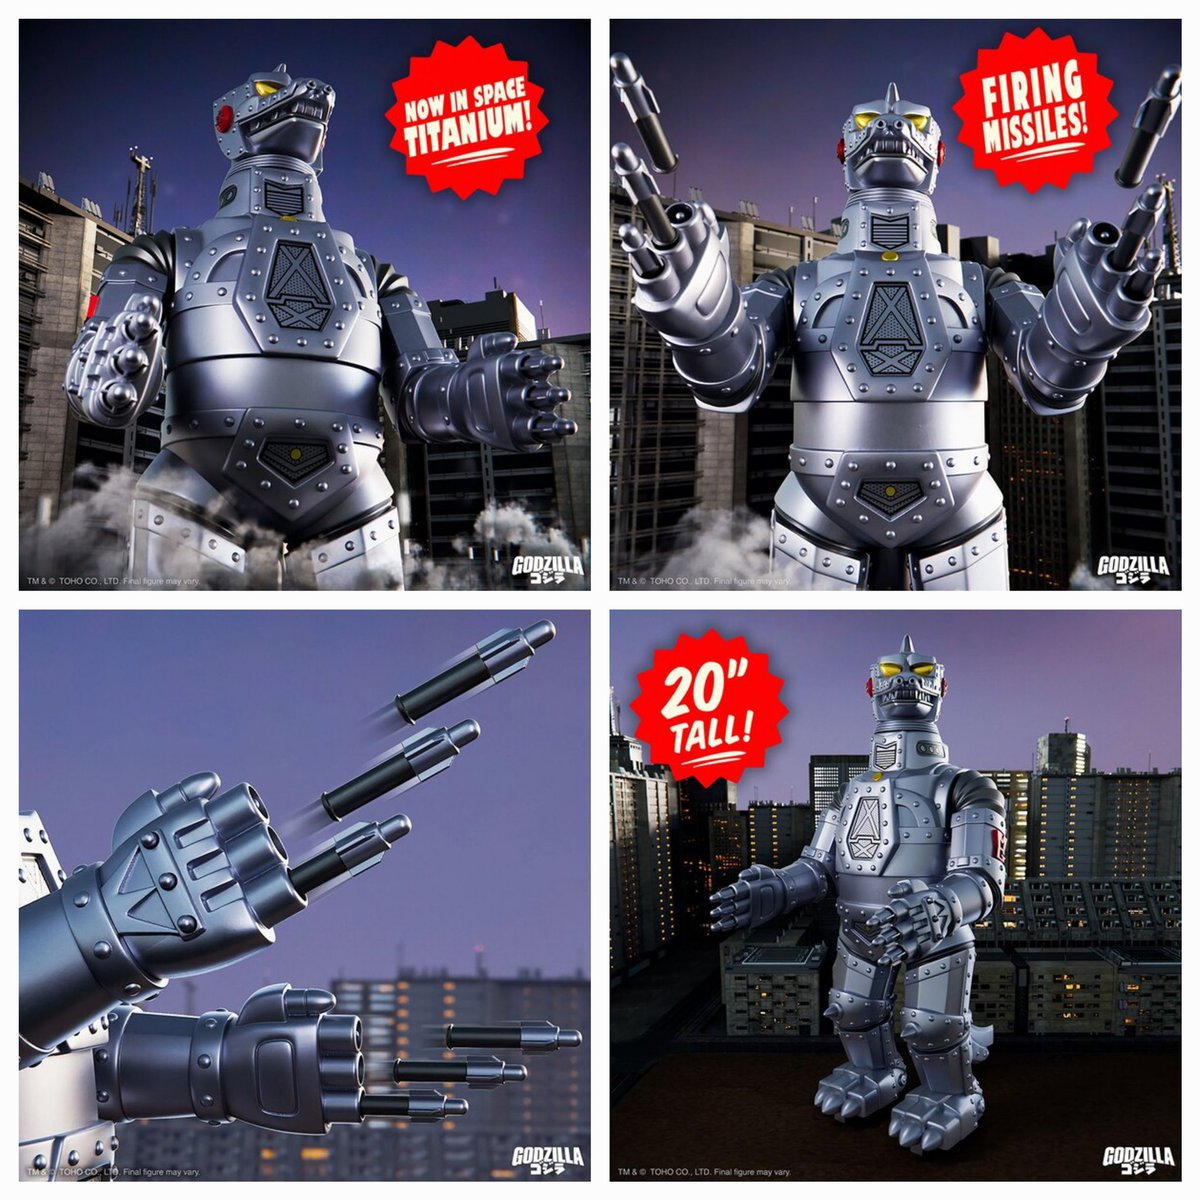 ✨️💥DISC ALERT💥✨️ #Statoversians! 👁🌛👁 🫶 Super7 Super Shogun Metallic Mechagodzilla is NOW up for preorder for ONLY ($345.00) at Entertainment Earth using their Buy MORE SAVE MORE PROMO! 💥Be sure to remove any other codes for the promo to work. #Super7 #kaiju